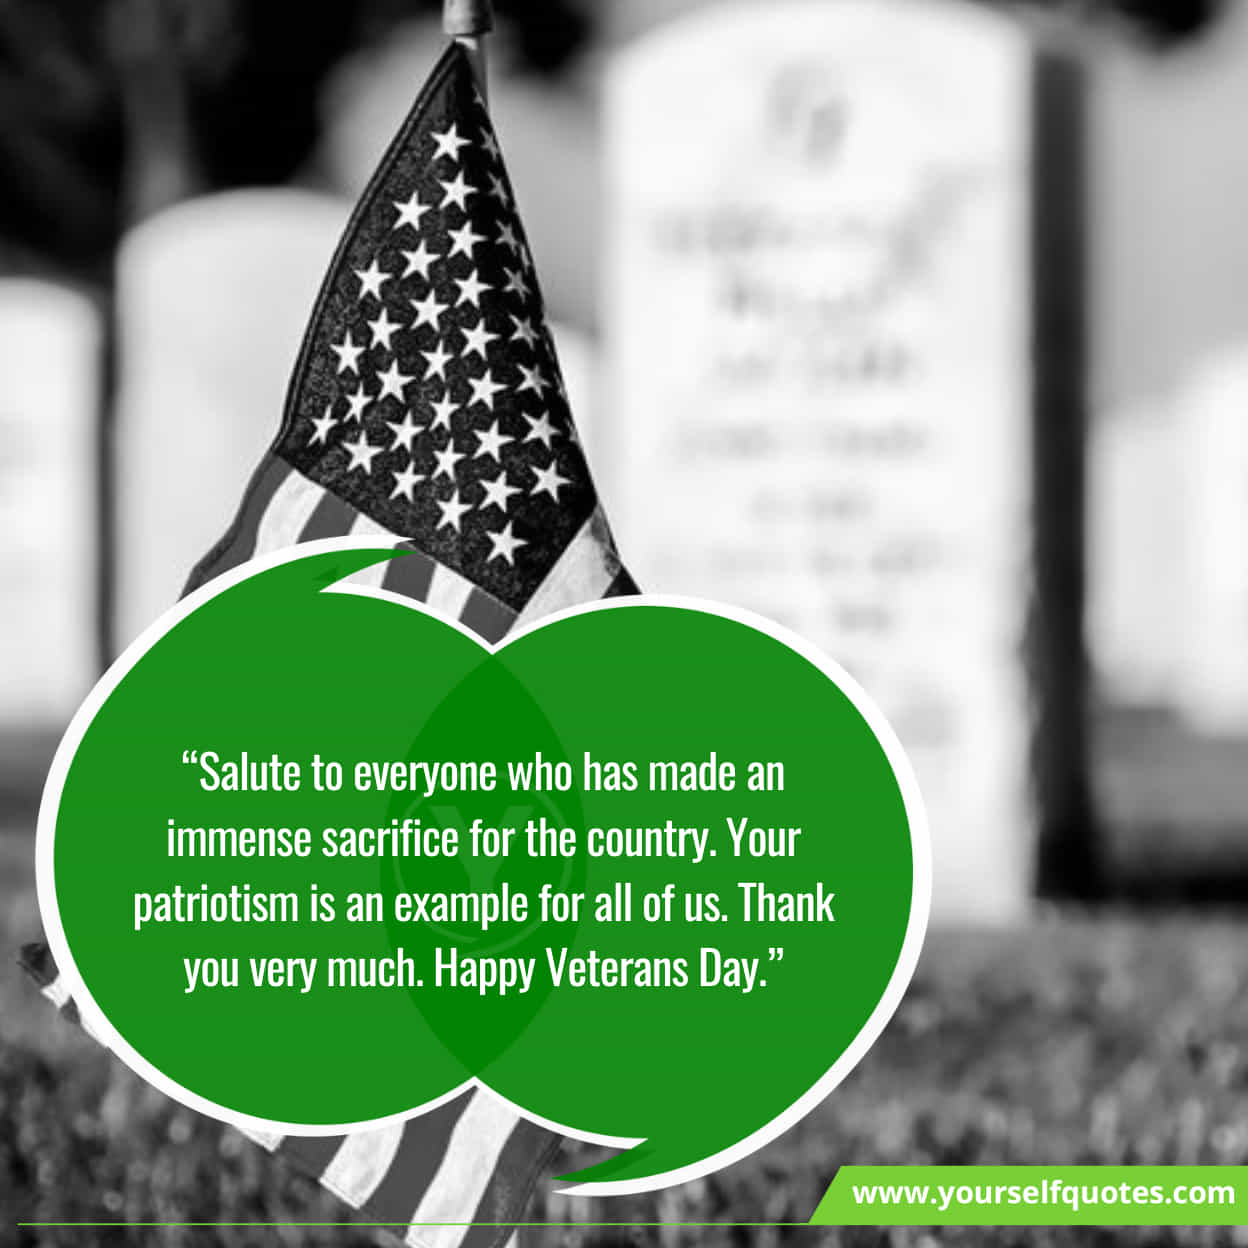 Inspiring Messages For Happy Veterans Day